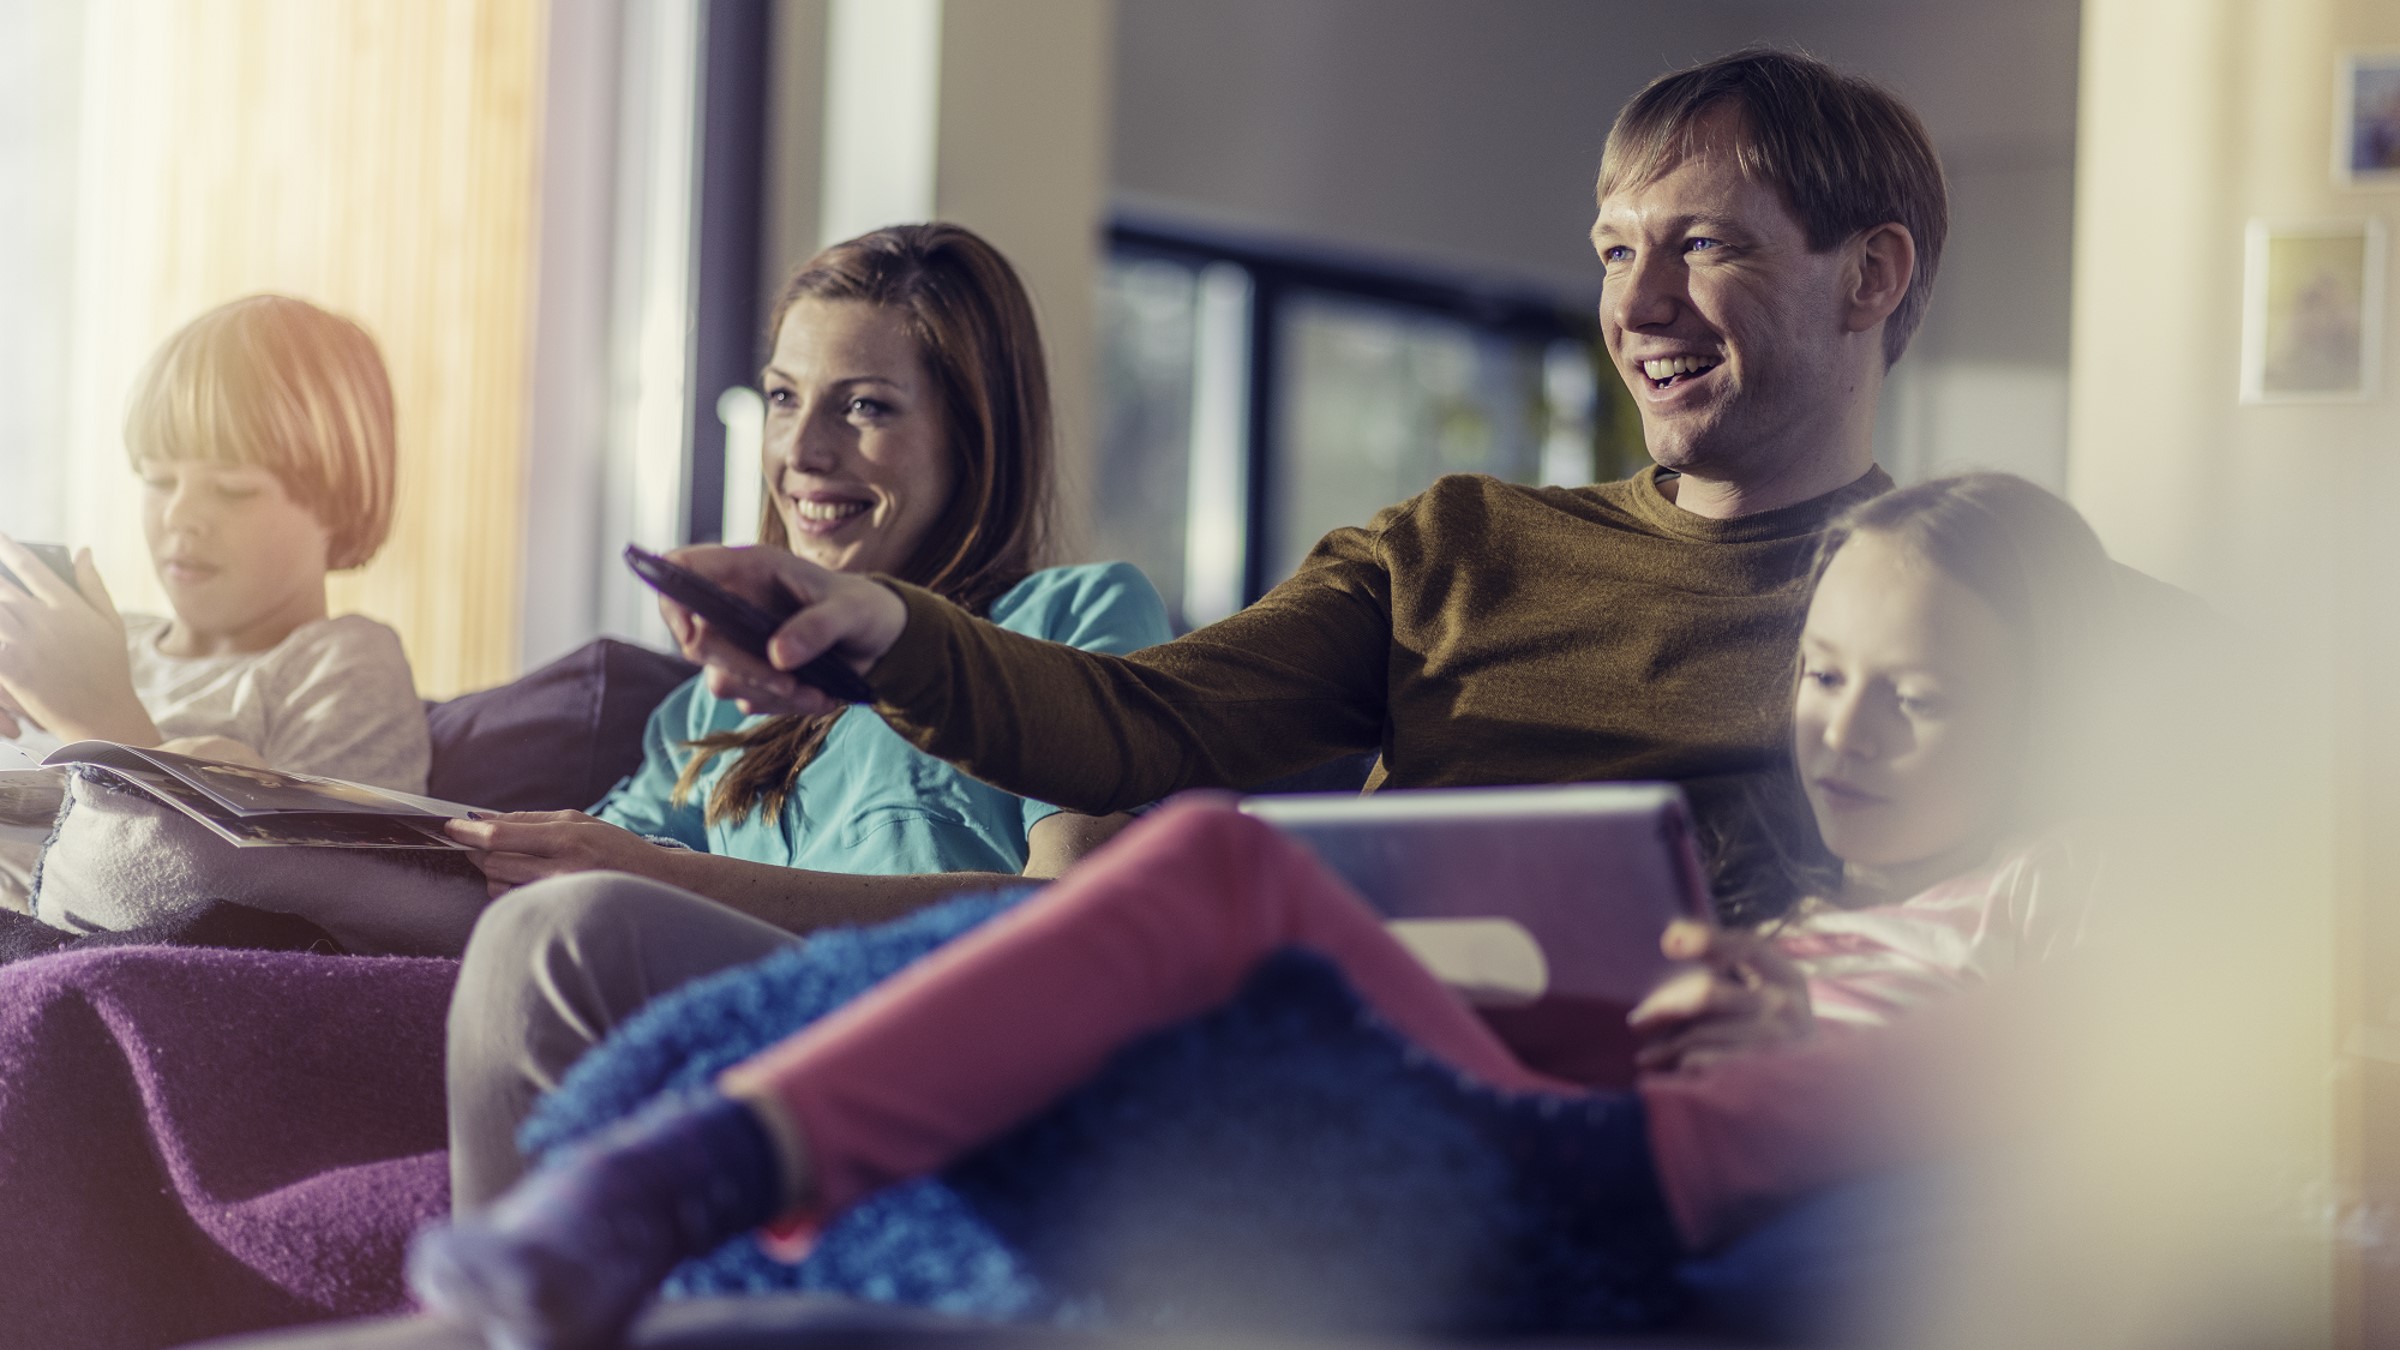 What You Need to Know About Connected TV Advertising